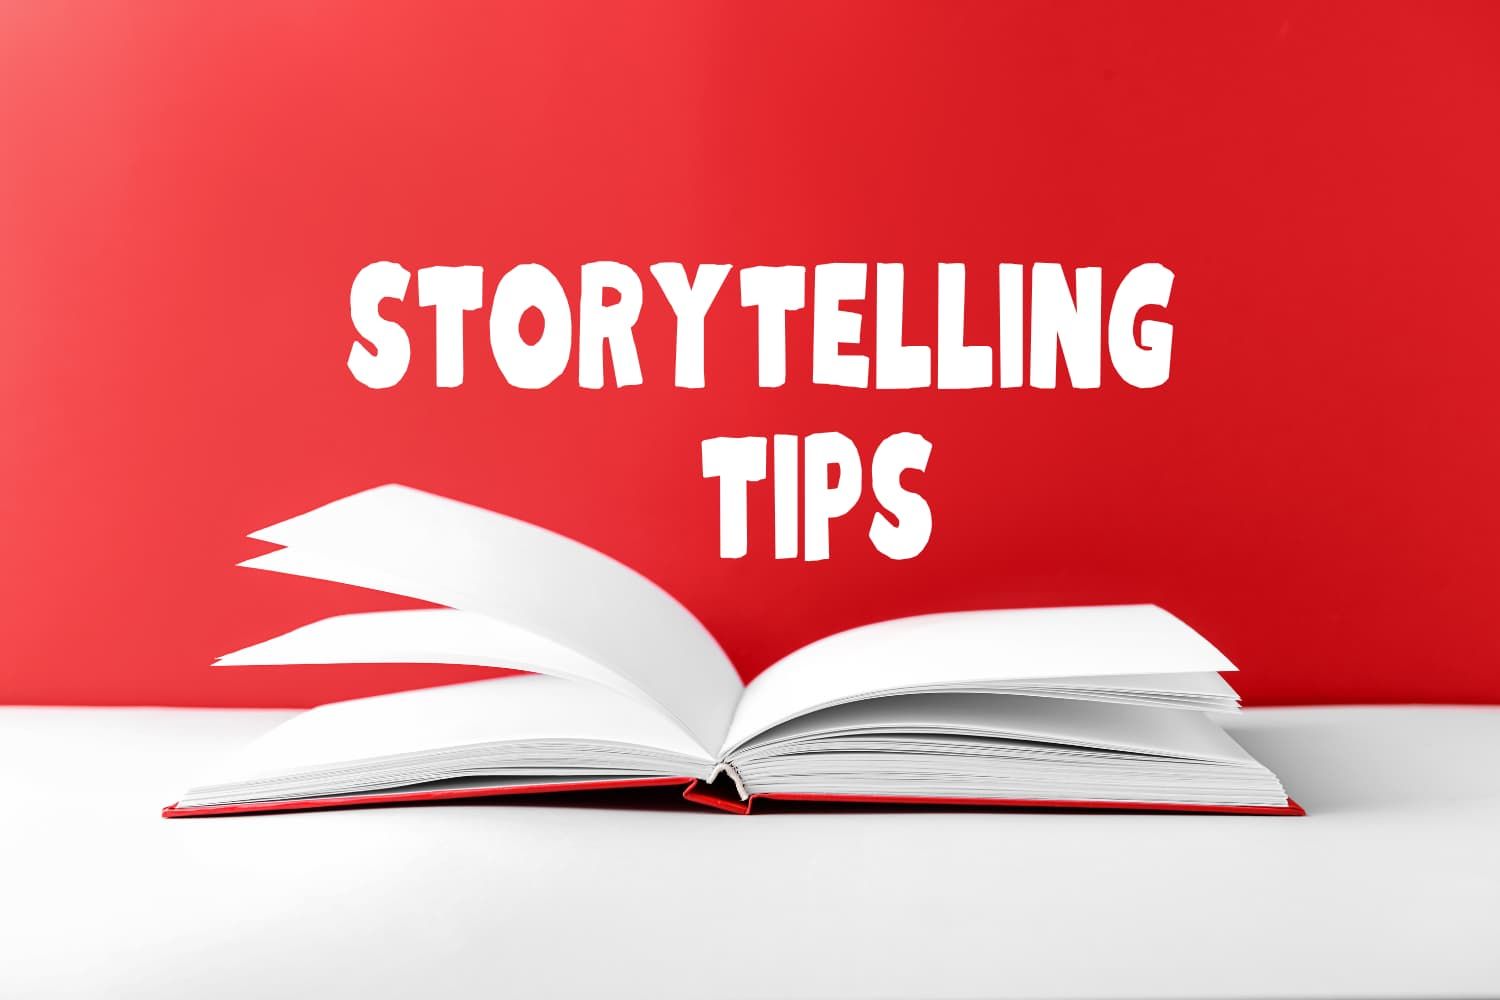 Storytelling%20tips%20-%20NT%20The%20pharisee%20and%20the%20tax%20collector%20-%20Teaching%20the%20parable%20of%20the%20tax%20collector%20and%20pharisee-bb2ec4e5 Humility / pride